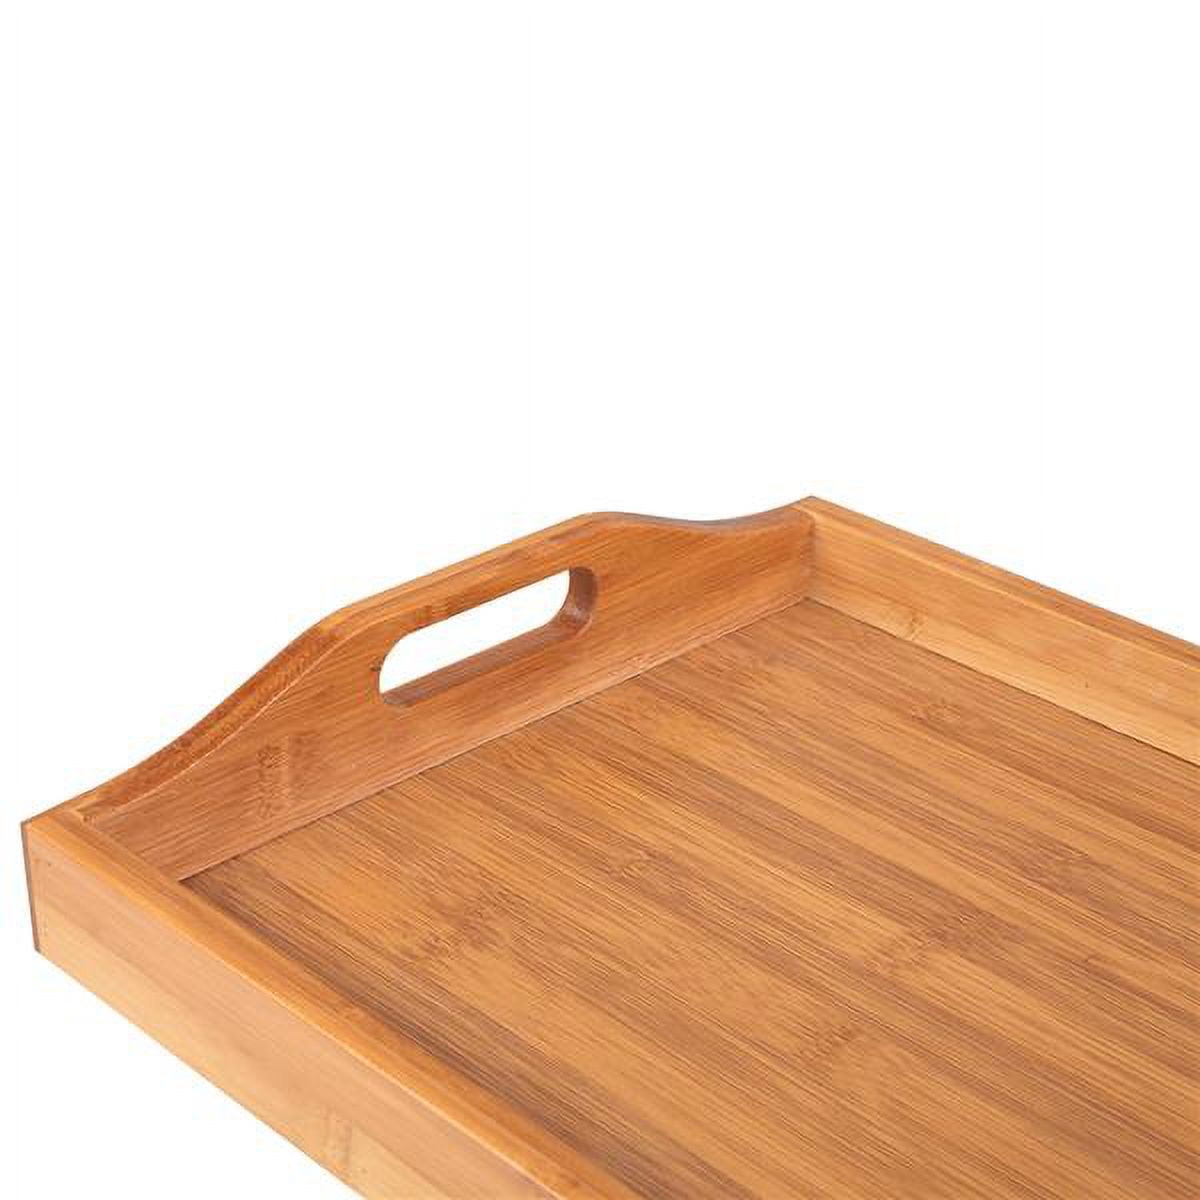 Santentre Serving Tray with Handles 15x10 Coffee Table Tray Decorative Tray for Home Decor Food Tray for Eating on Couch,Bamboo Serving Trays for